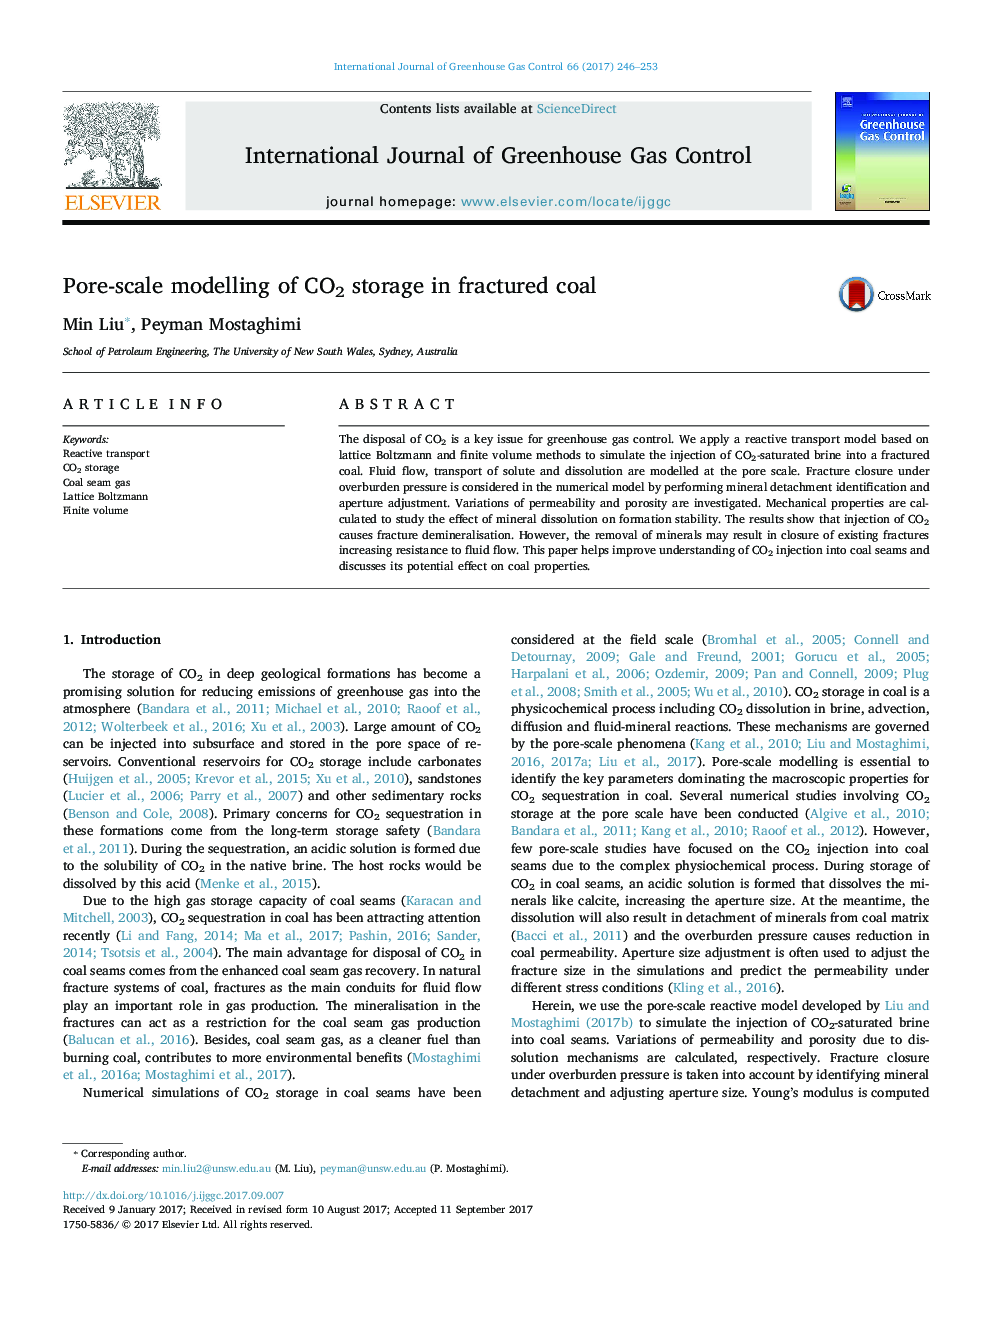 Pore-scale modelling of CO2 storage in fractured coal